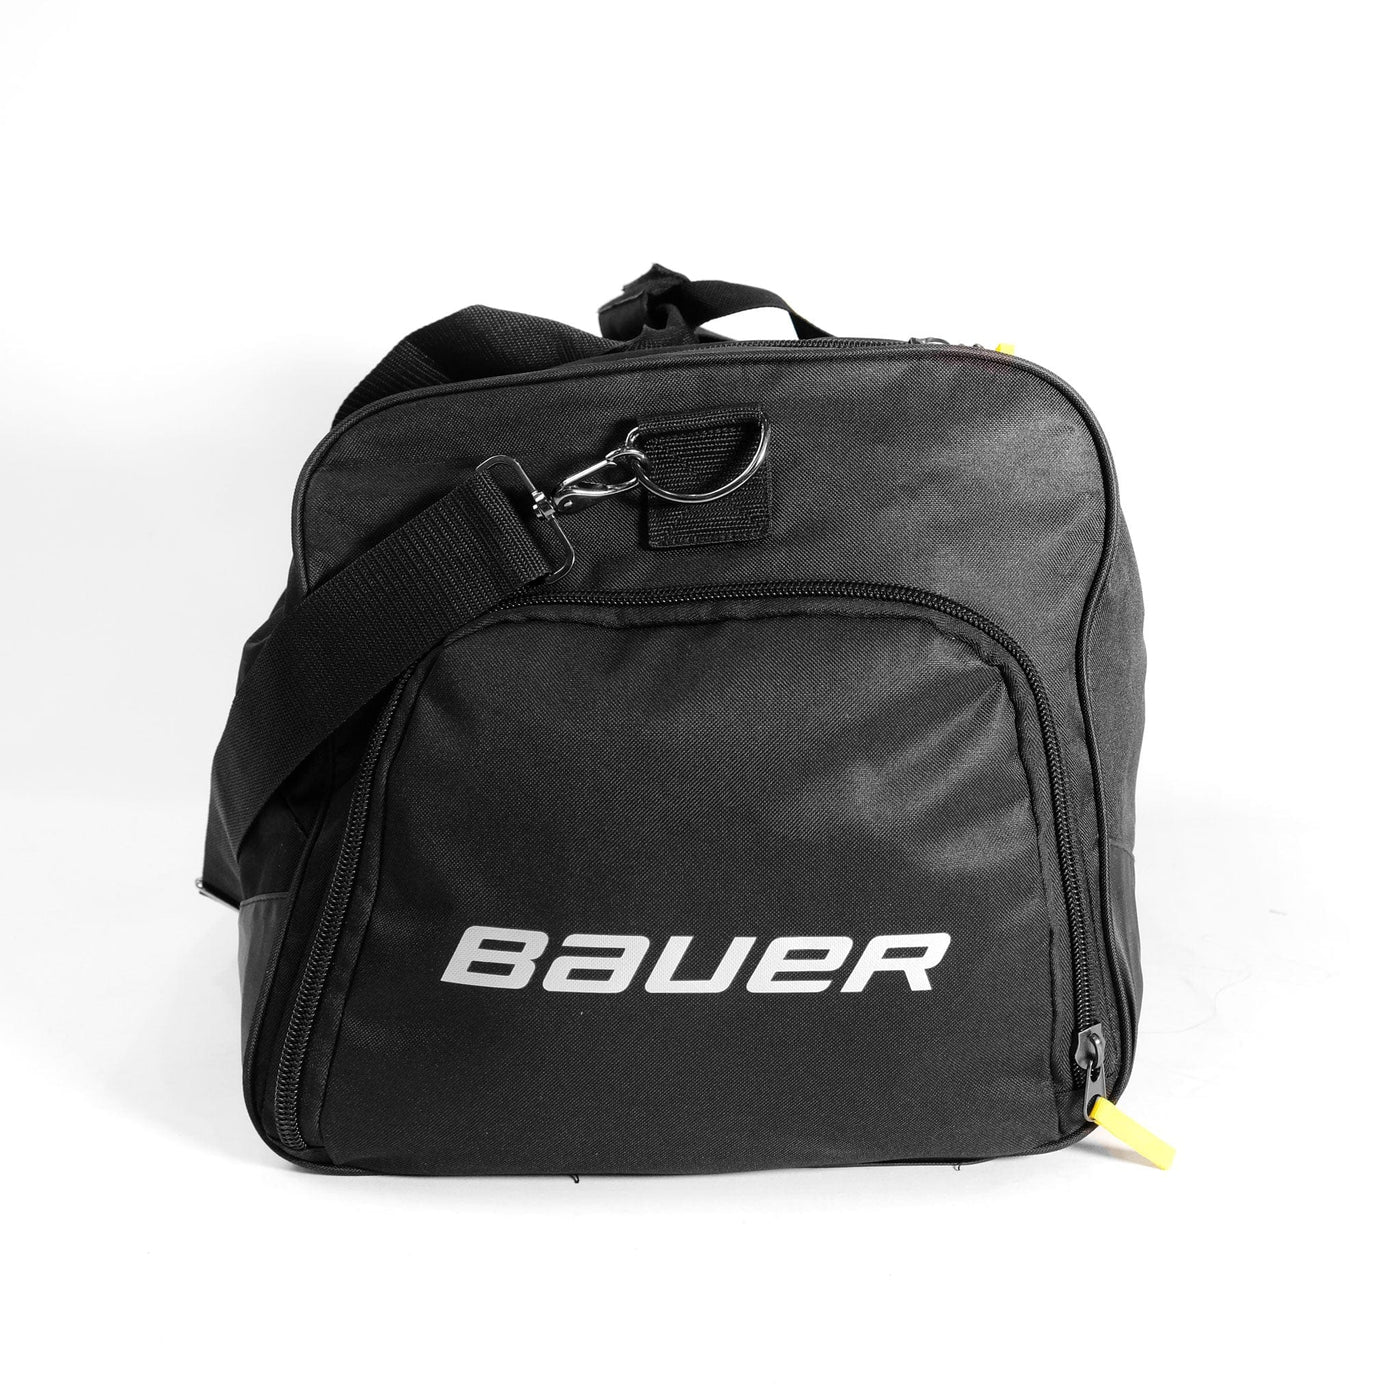 Bauer Hockey Referee Carry Bag - The Hockey Shop Source For Sports